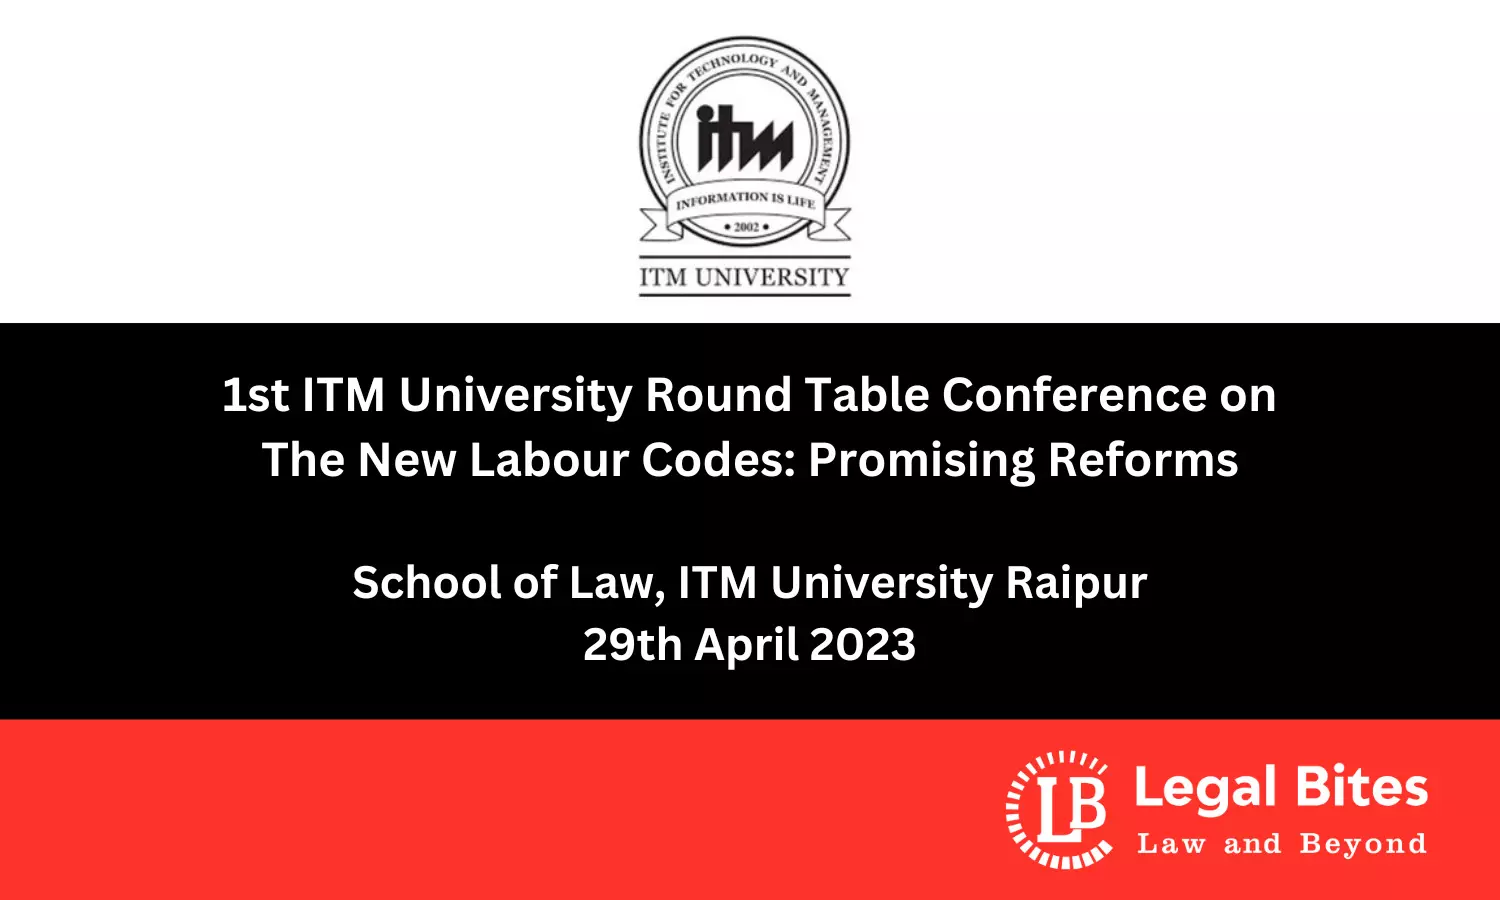 1st ITM University Round Table Conference on The New Labour Codes: Promising Reforms | School of Law | 29th April 2023